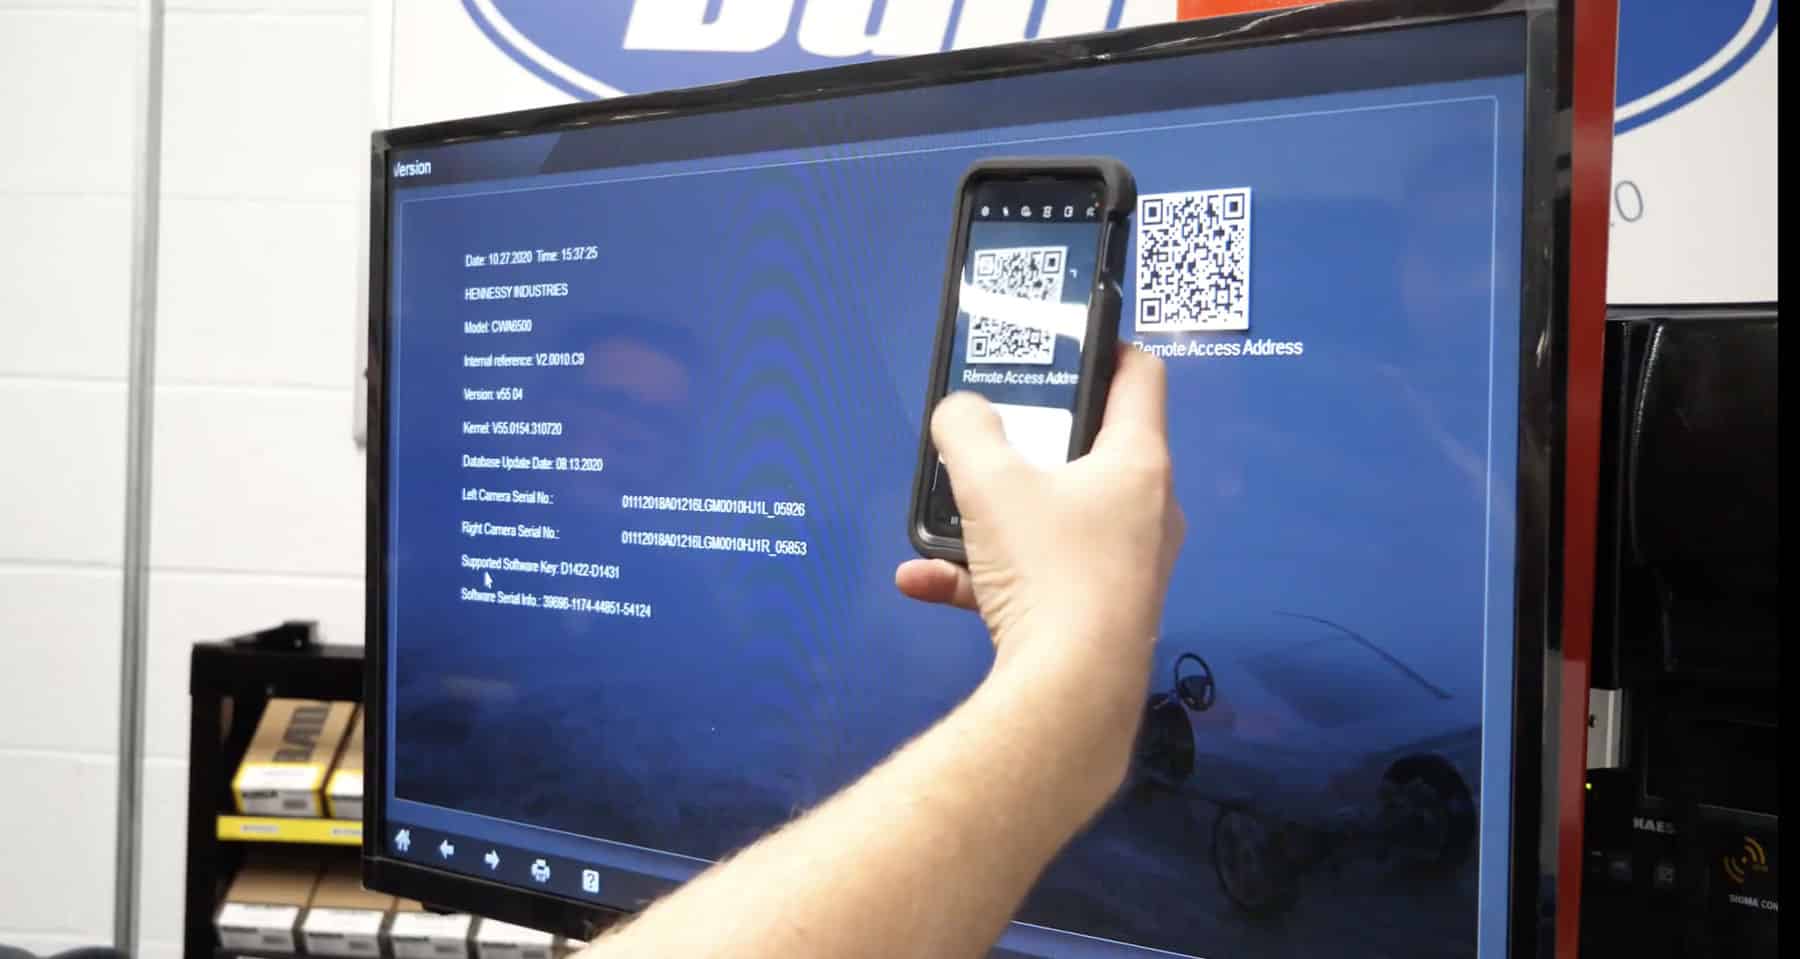 A technician uses his mobile phone camera to scan the QR code on the aligner’s desktop monitor